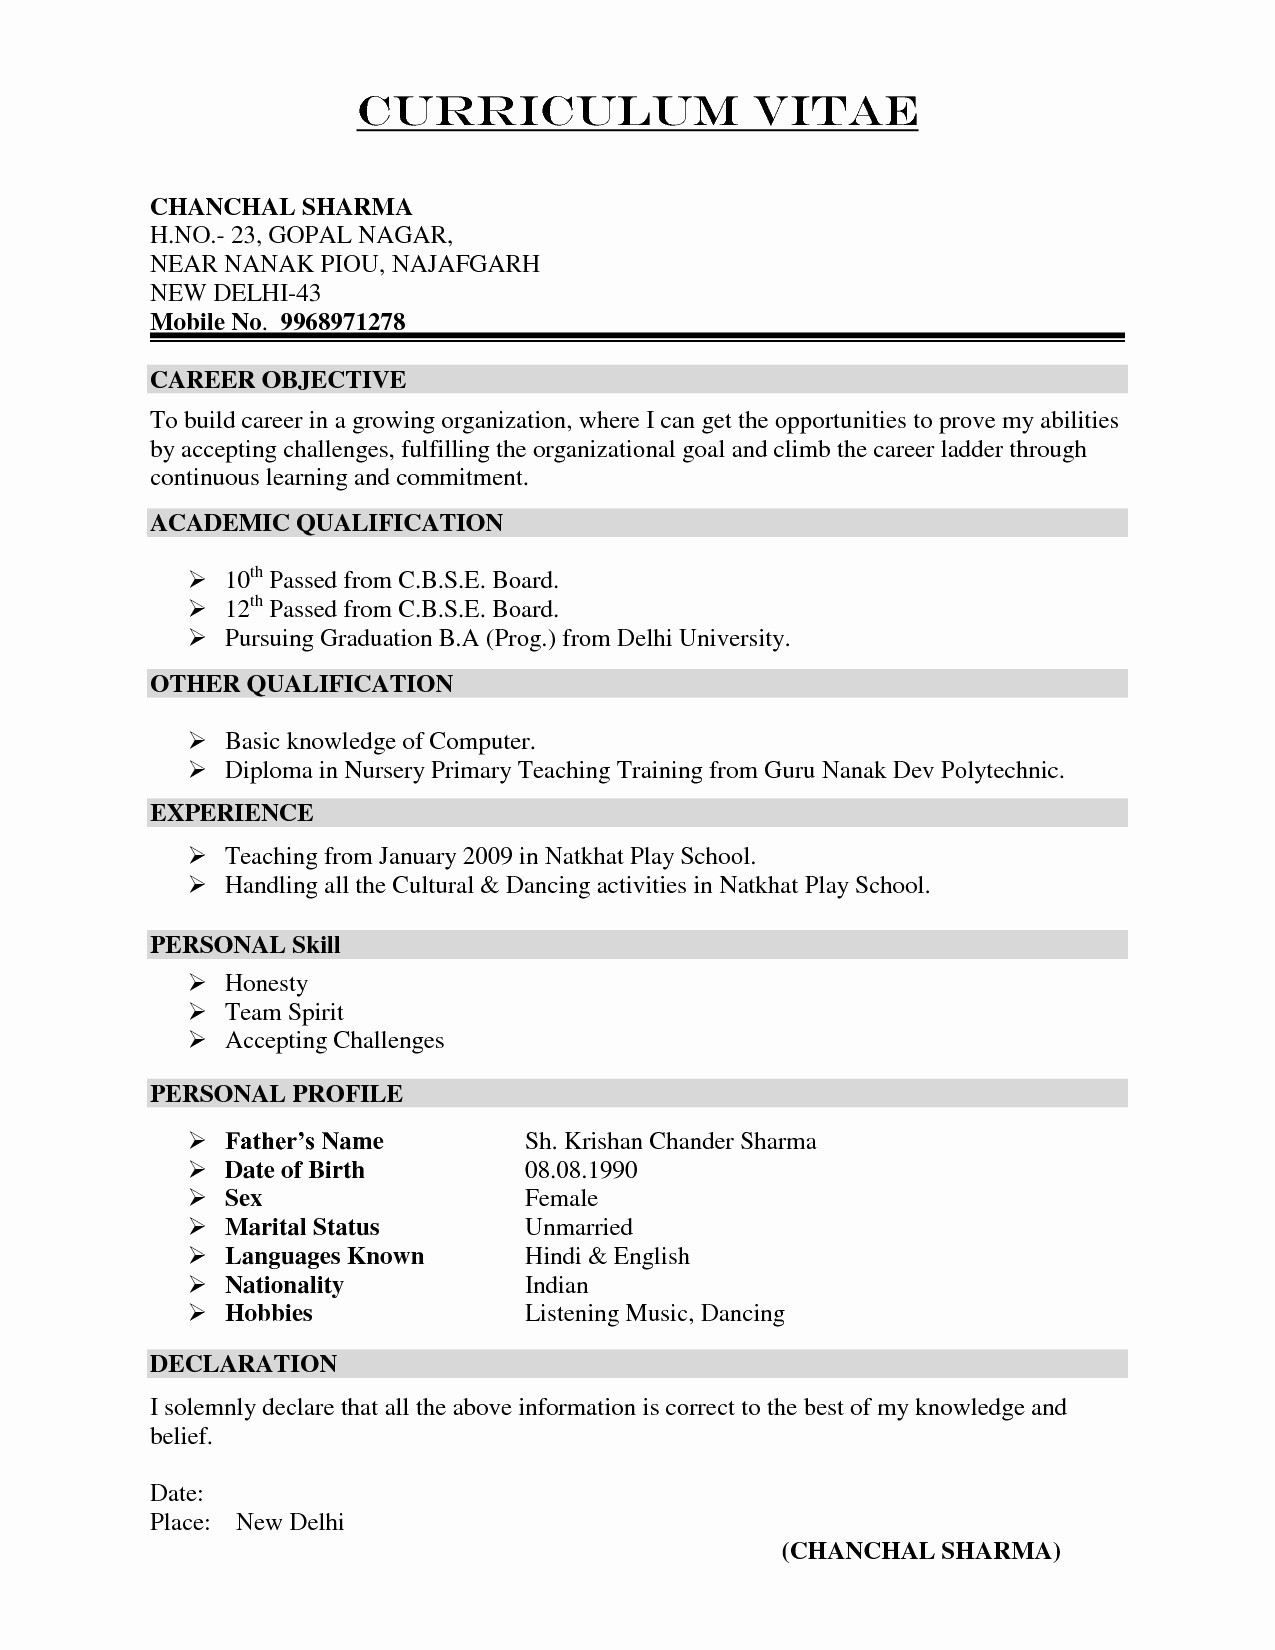 Legal Covering Letter Template - Resumes and Cover Letters Elegant New Resume Cover Letter formatted